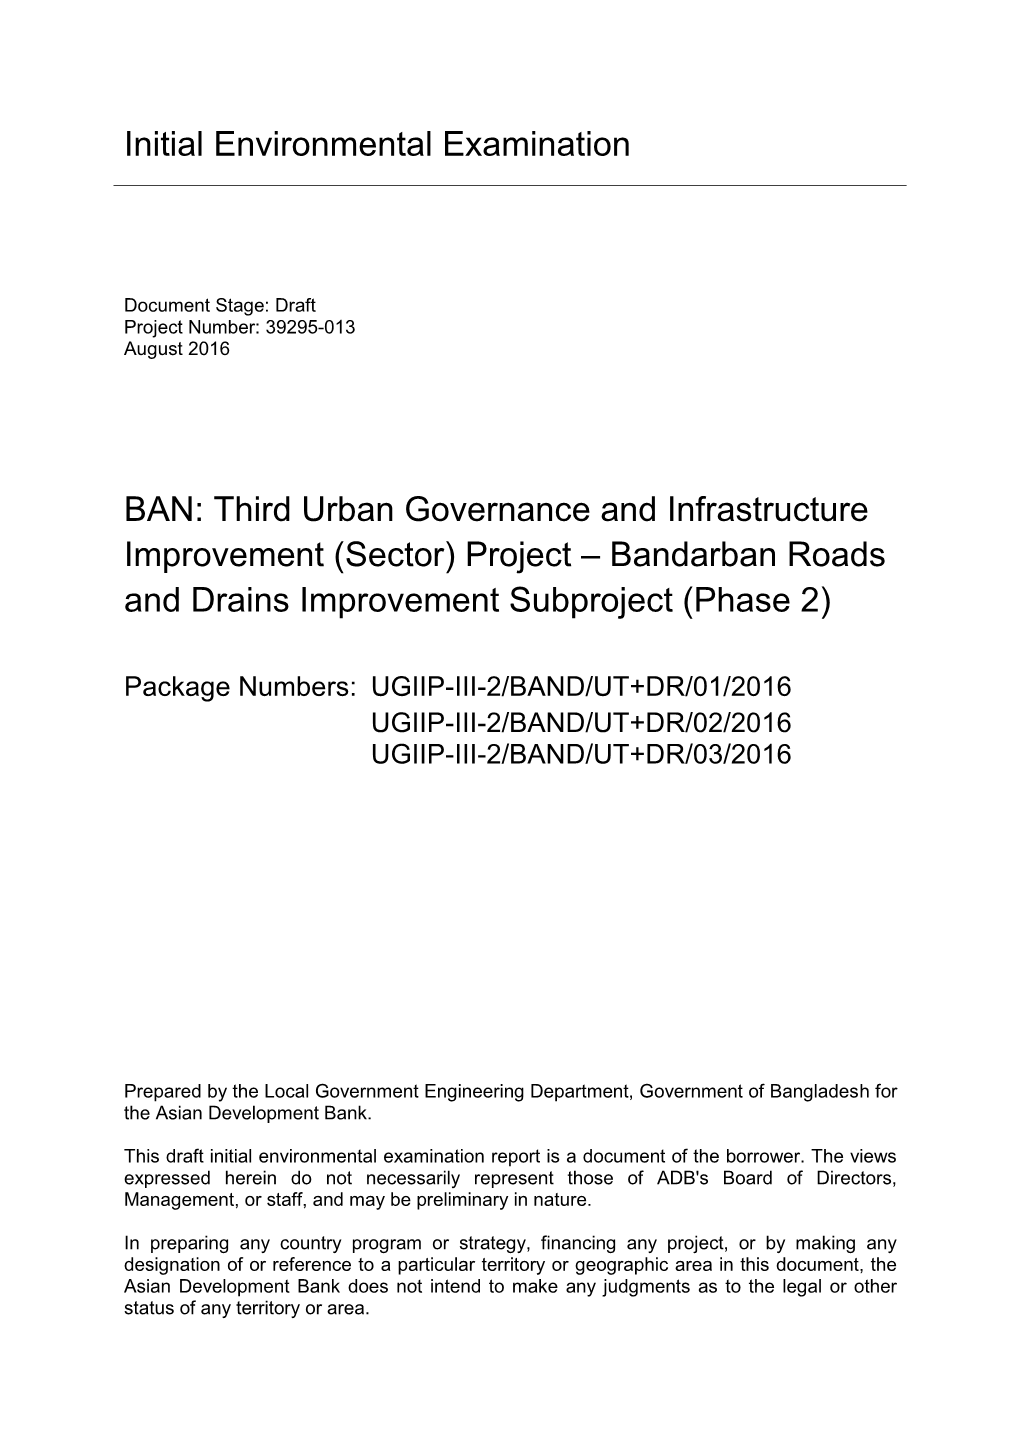 Initial Environmental Examination BAN: Third Urban Governance and Infrastructure Improvement (Sector) Project – Bandarban Road